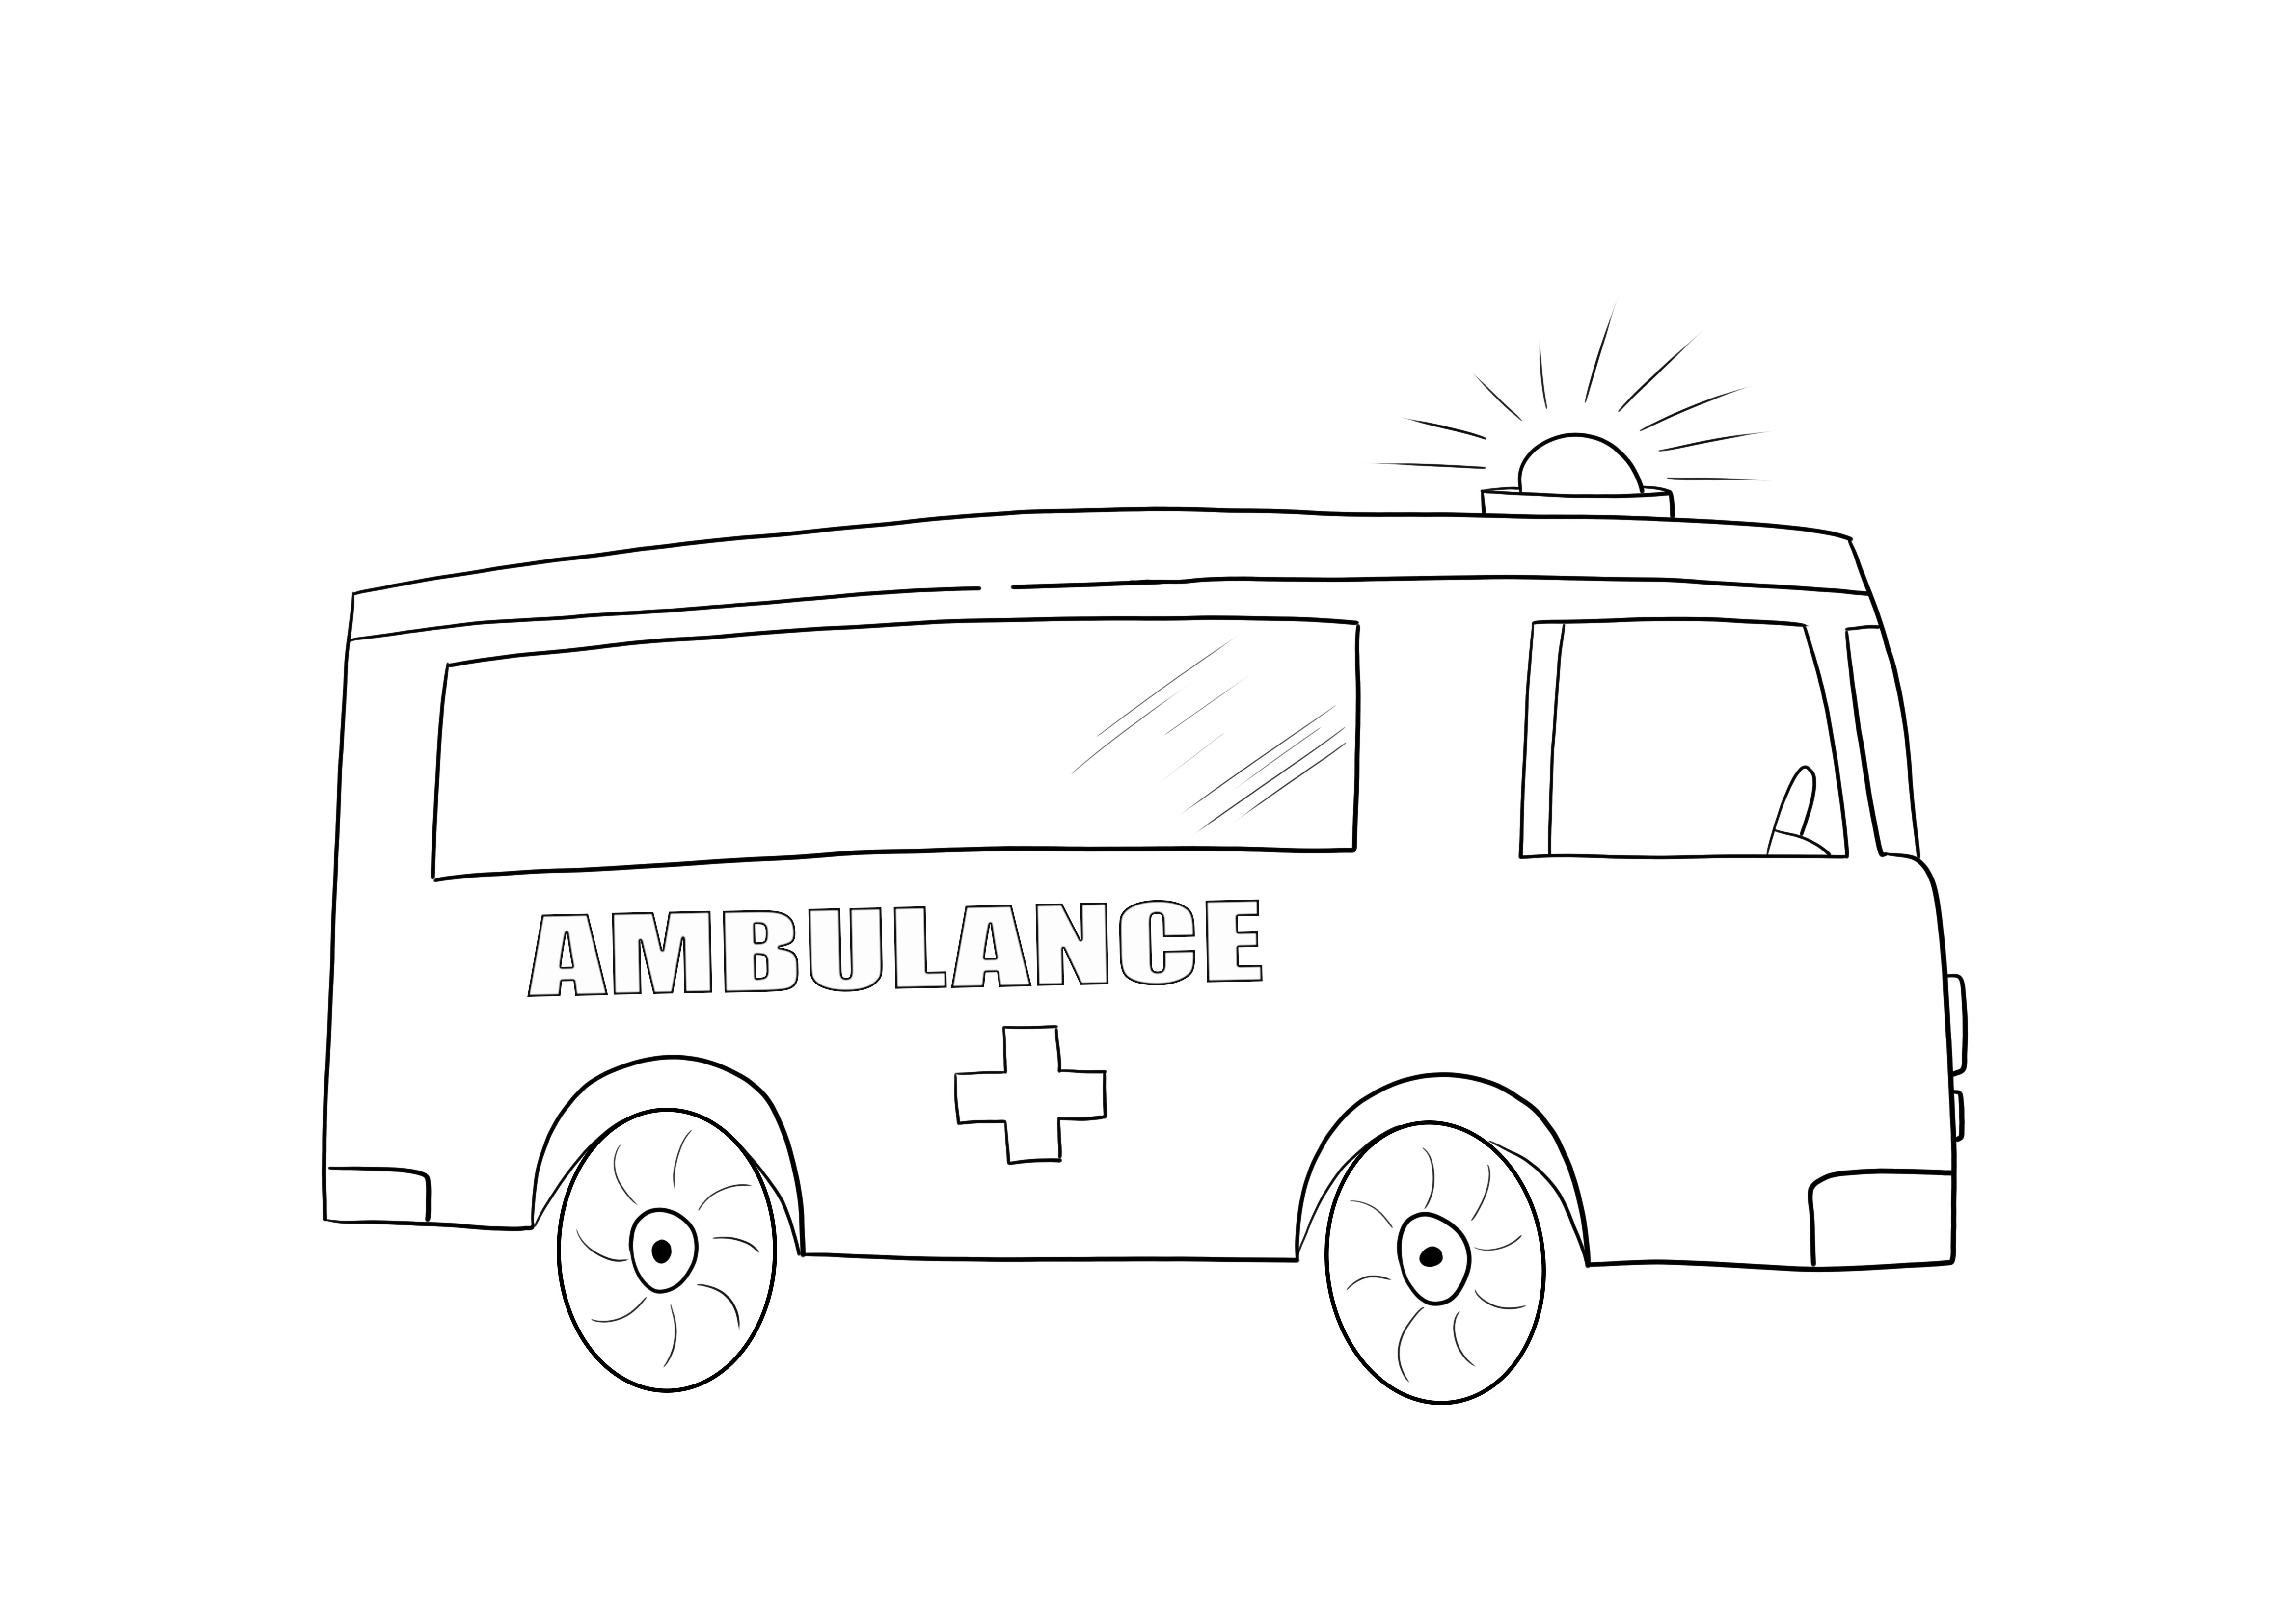 Ambulance free to print or download page